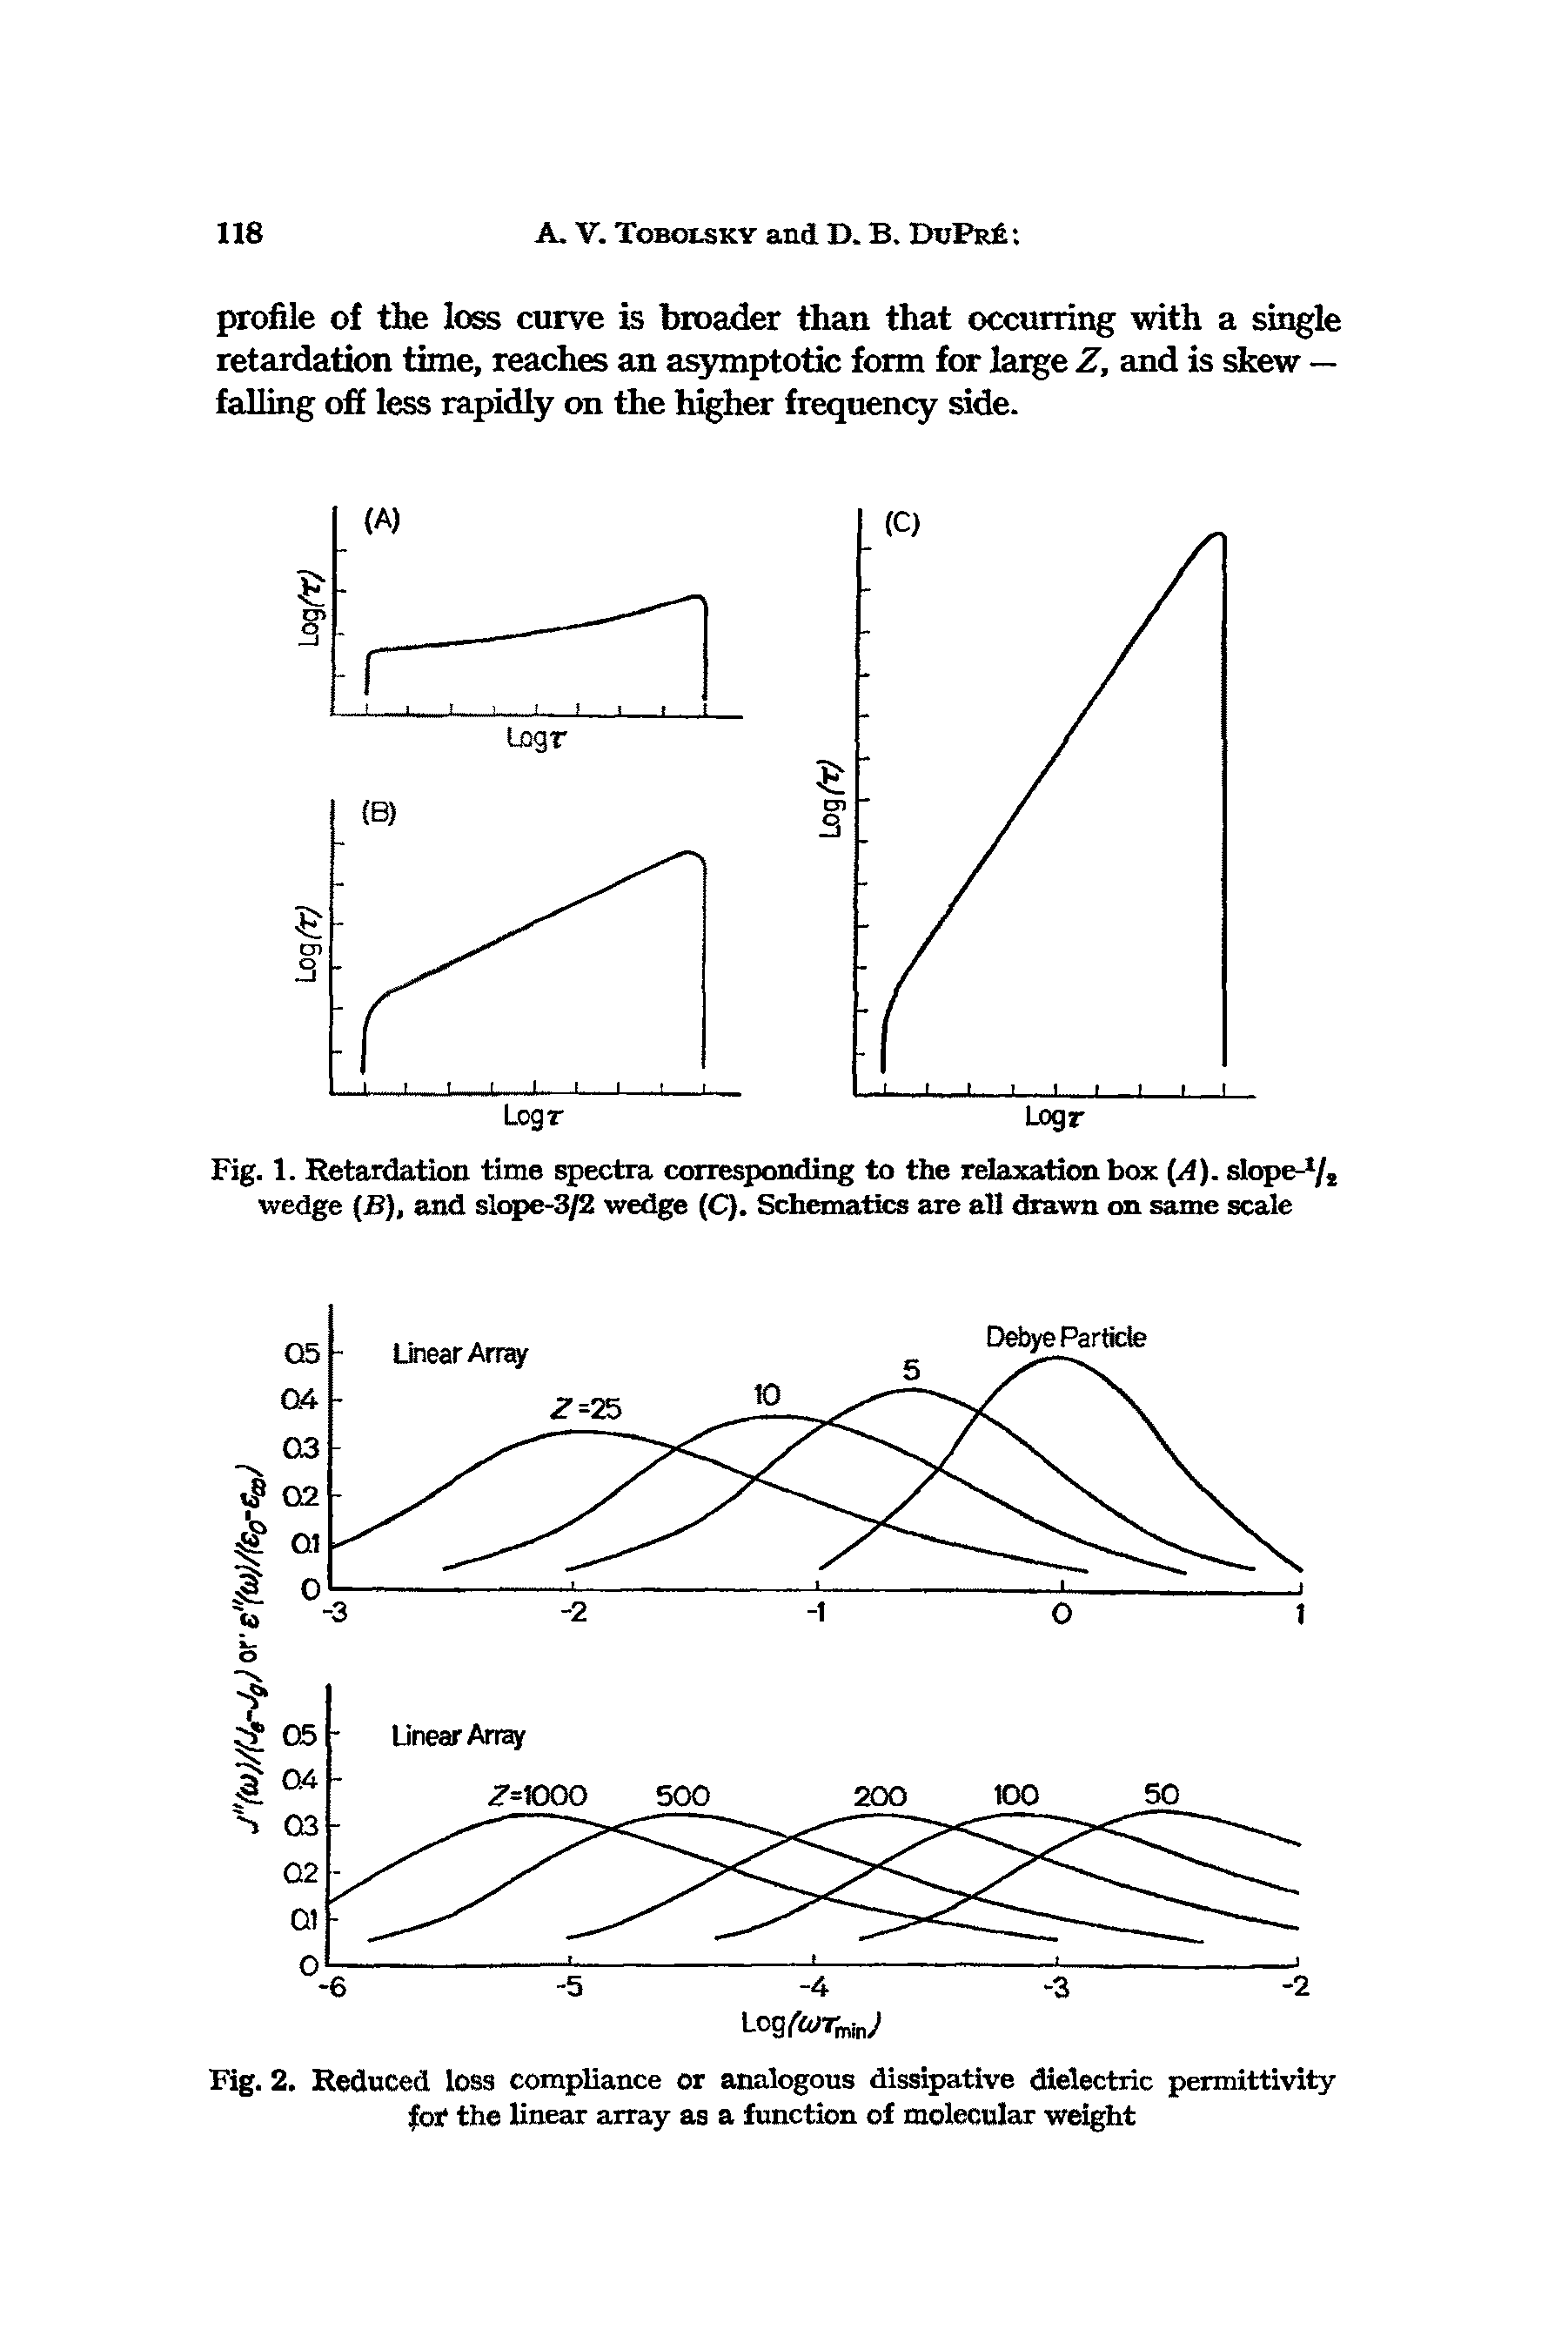 Fig. 1. Retardation time spectra corresponding to the relaxation box (A), slope- /2 wedge (B), and slope-3/2 wedge (C). Schematics are all drawn on same scale...